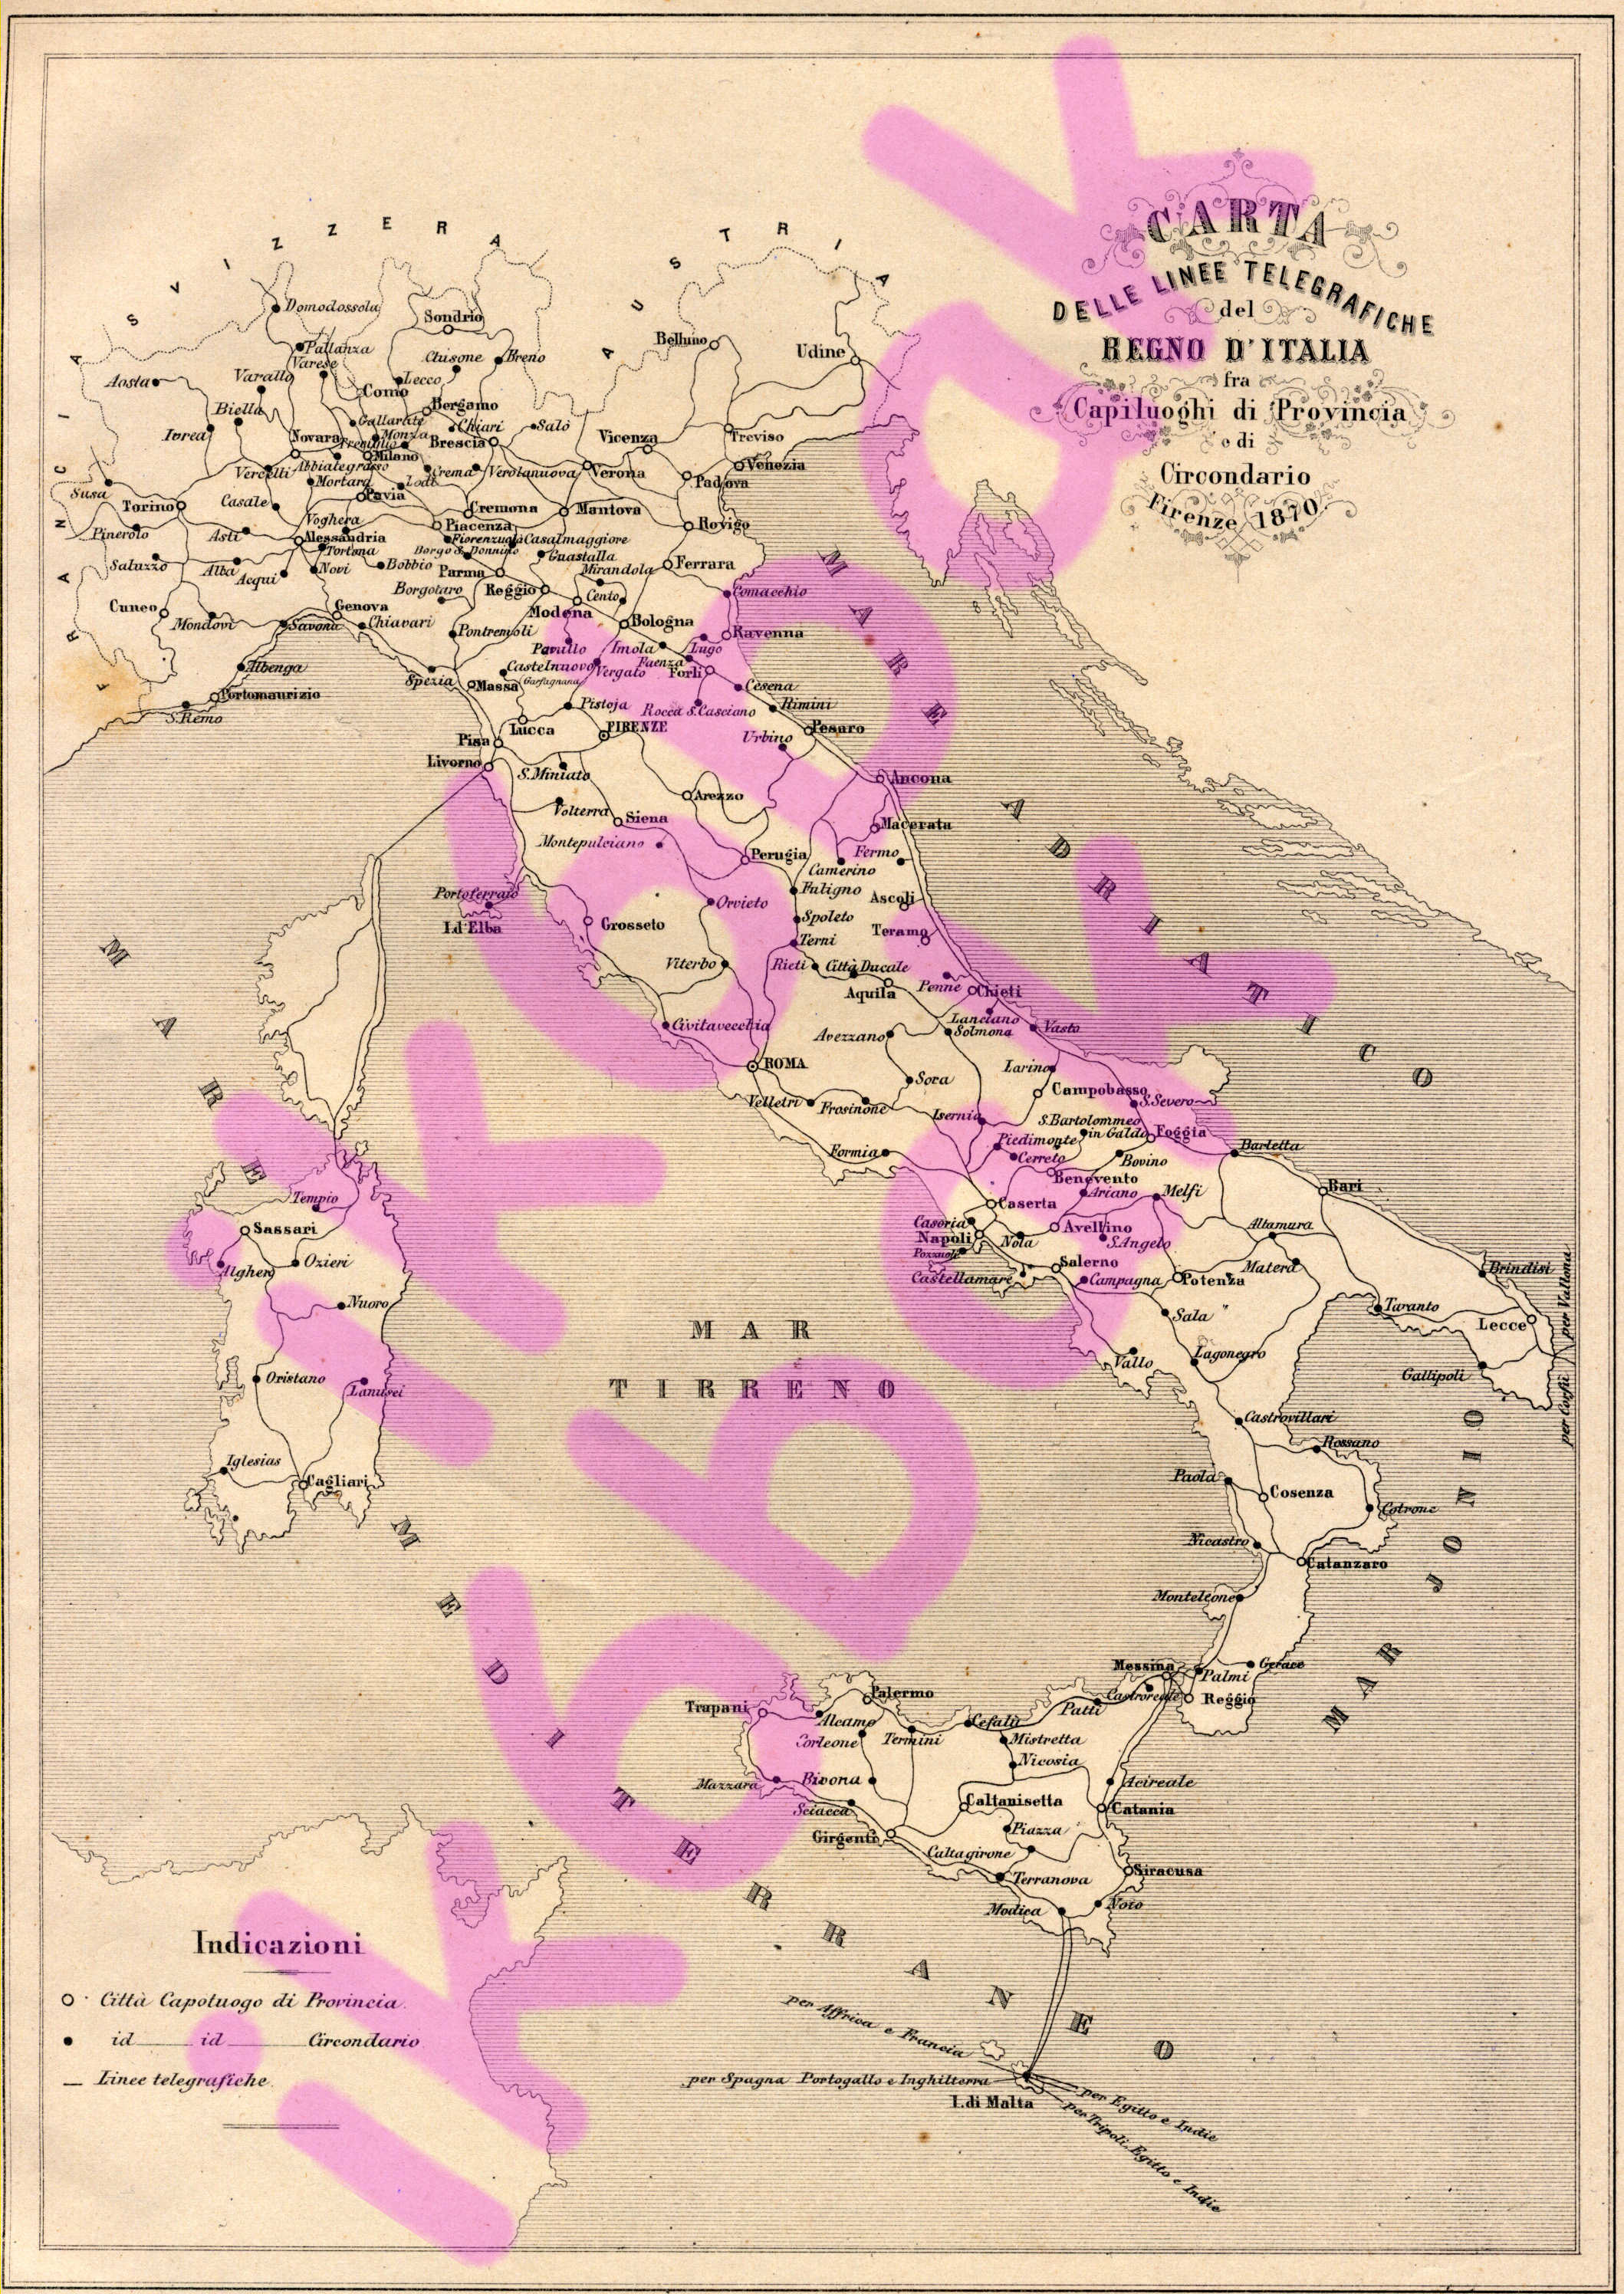 1870 - Map of telegraph lines in reunited Italy